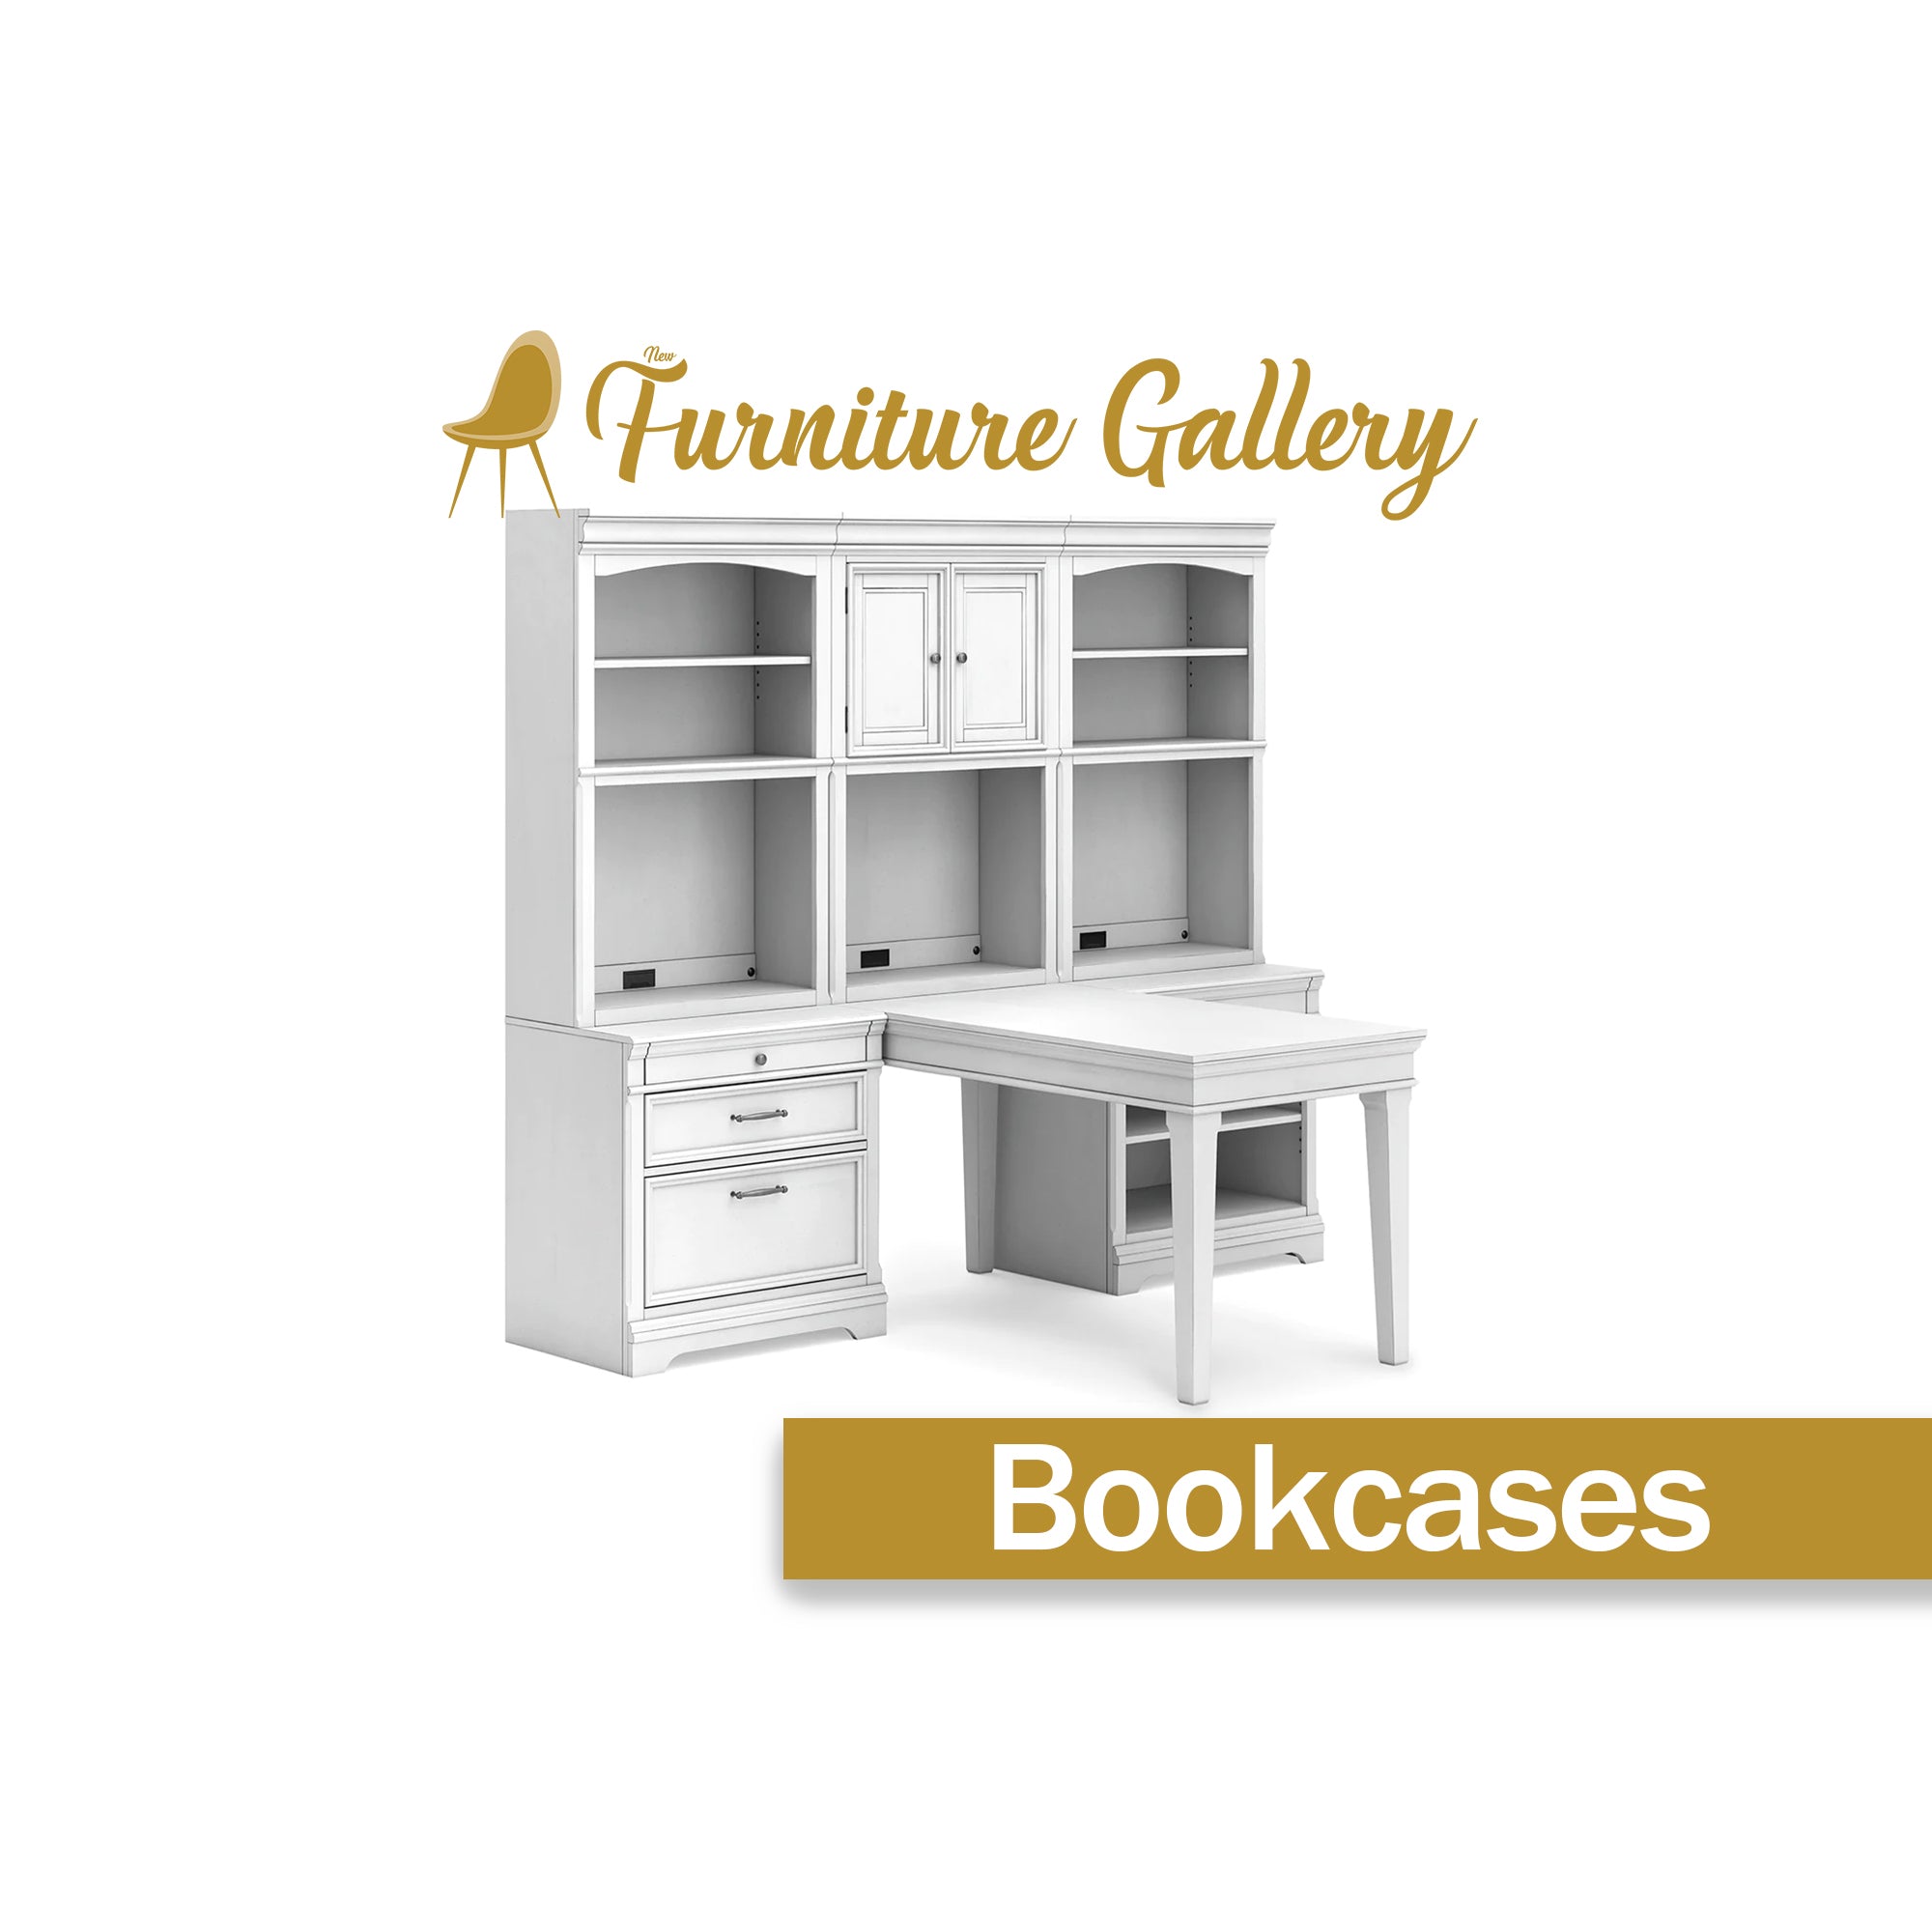 Bookcases by New Furniture Gallery. 